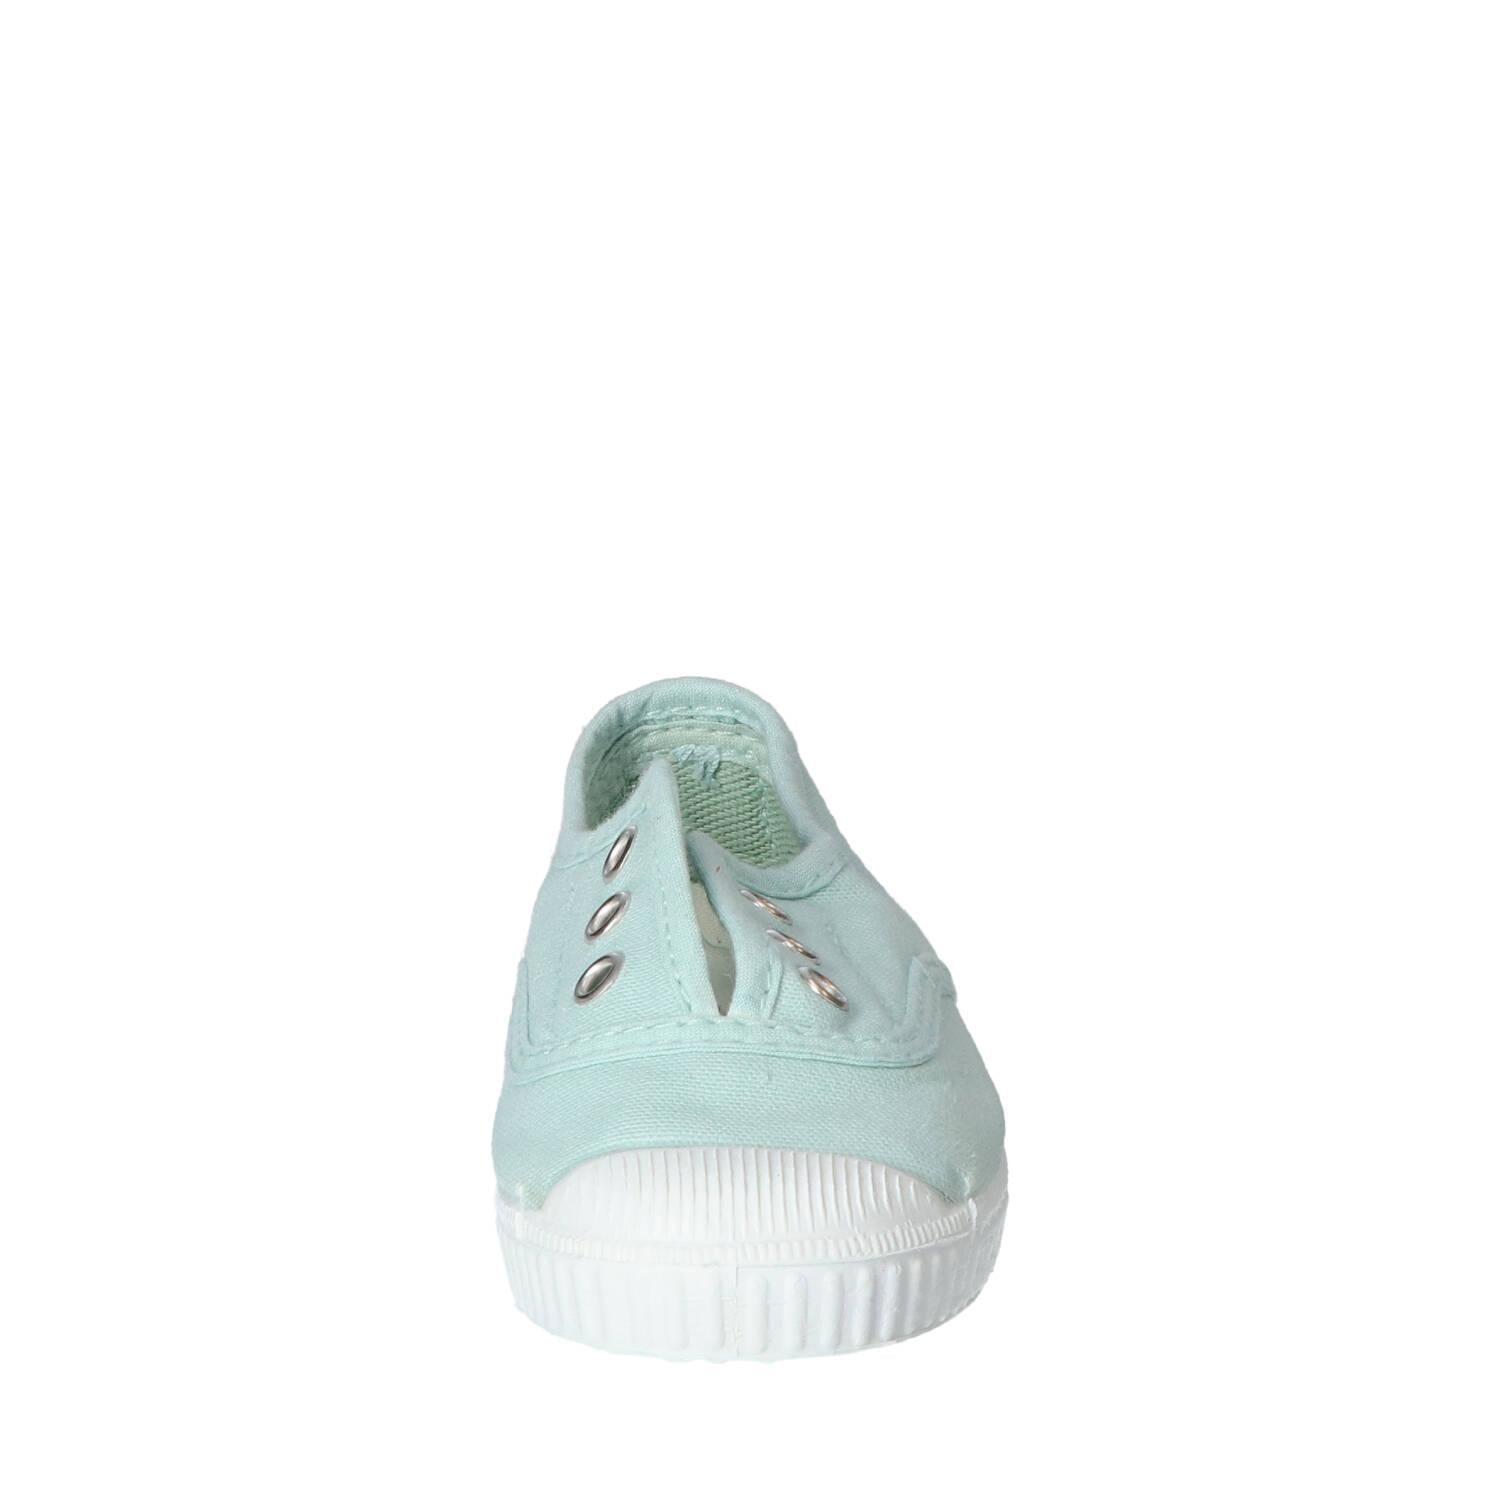 Chaussures Velcro, Turquoise